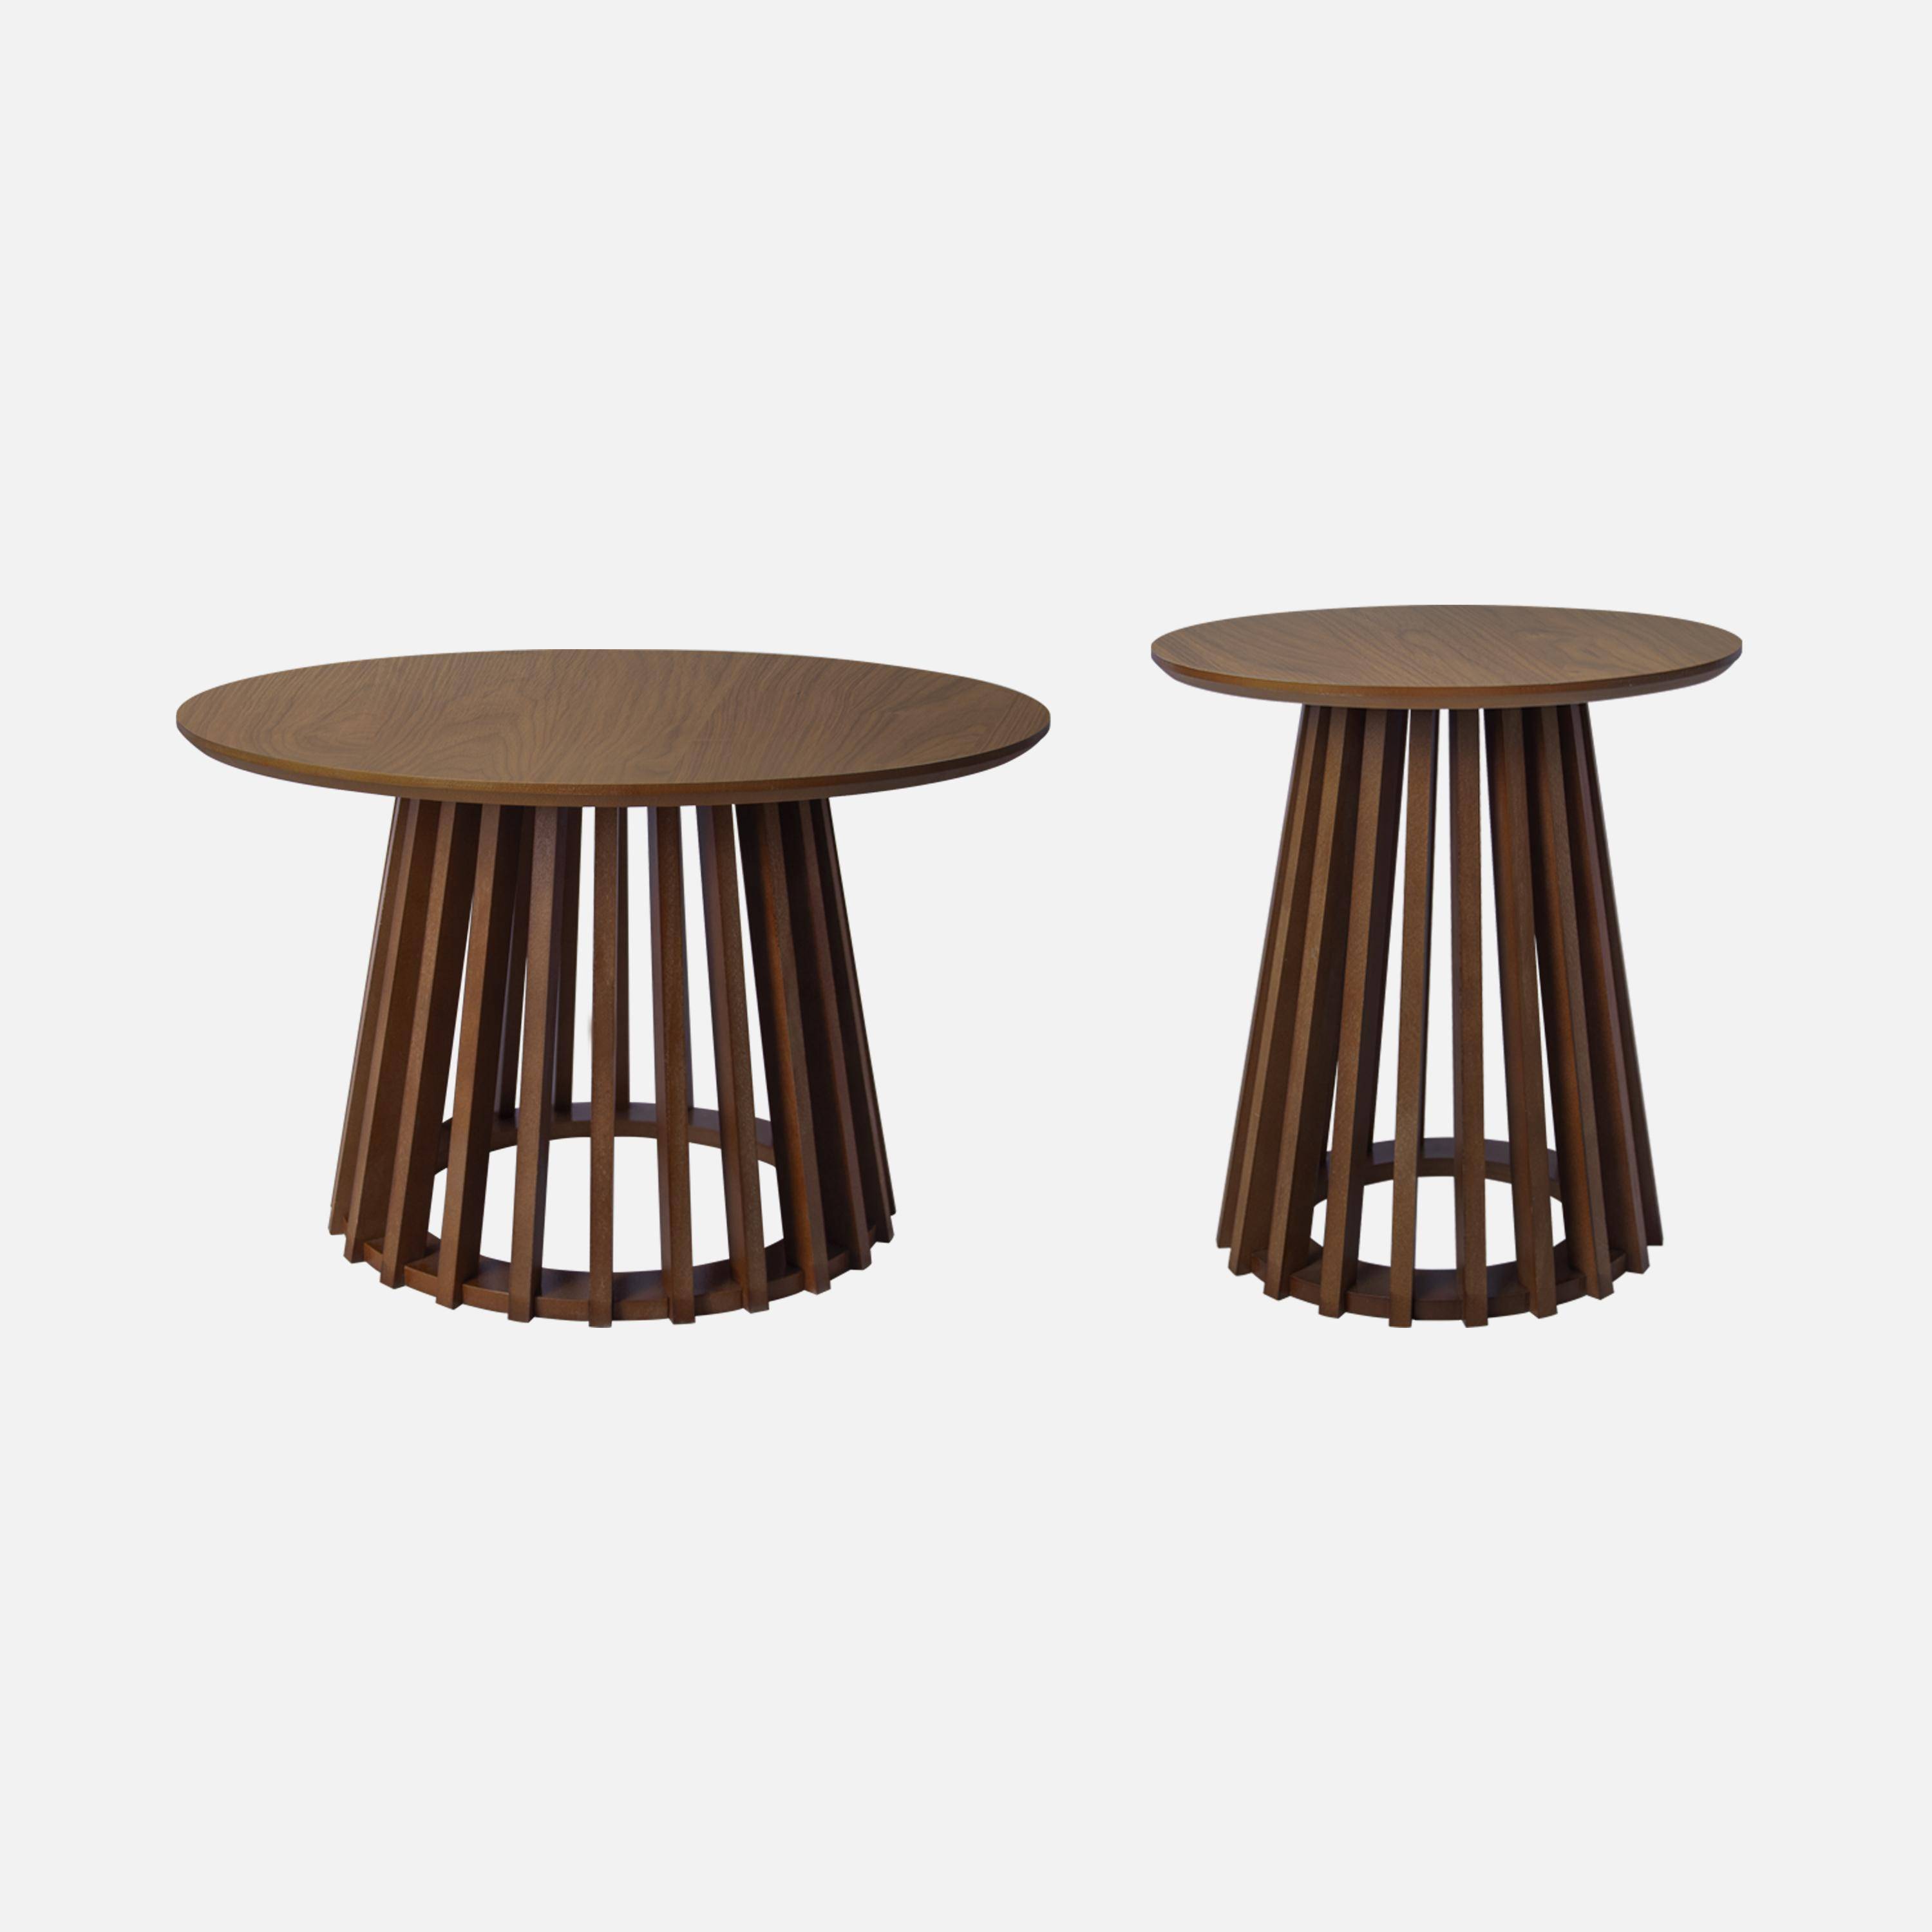 Set of 2 round coffee tables with walnut wood-effect top and fir wood legs, 40cm and 60cm,sweeek,Photo1